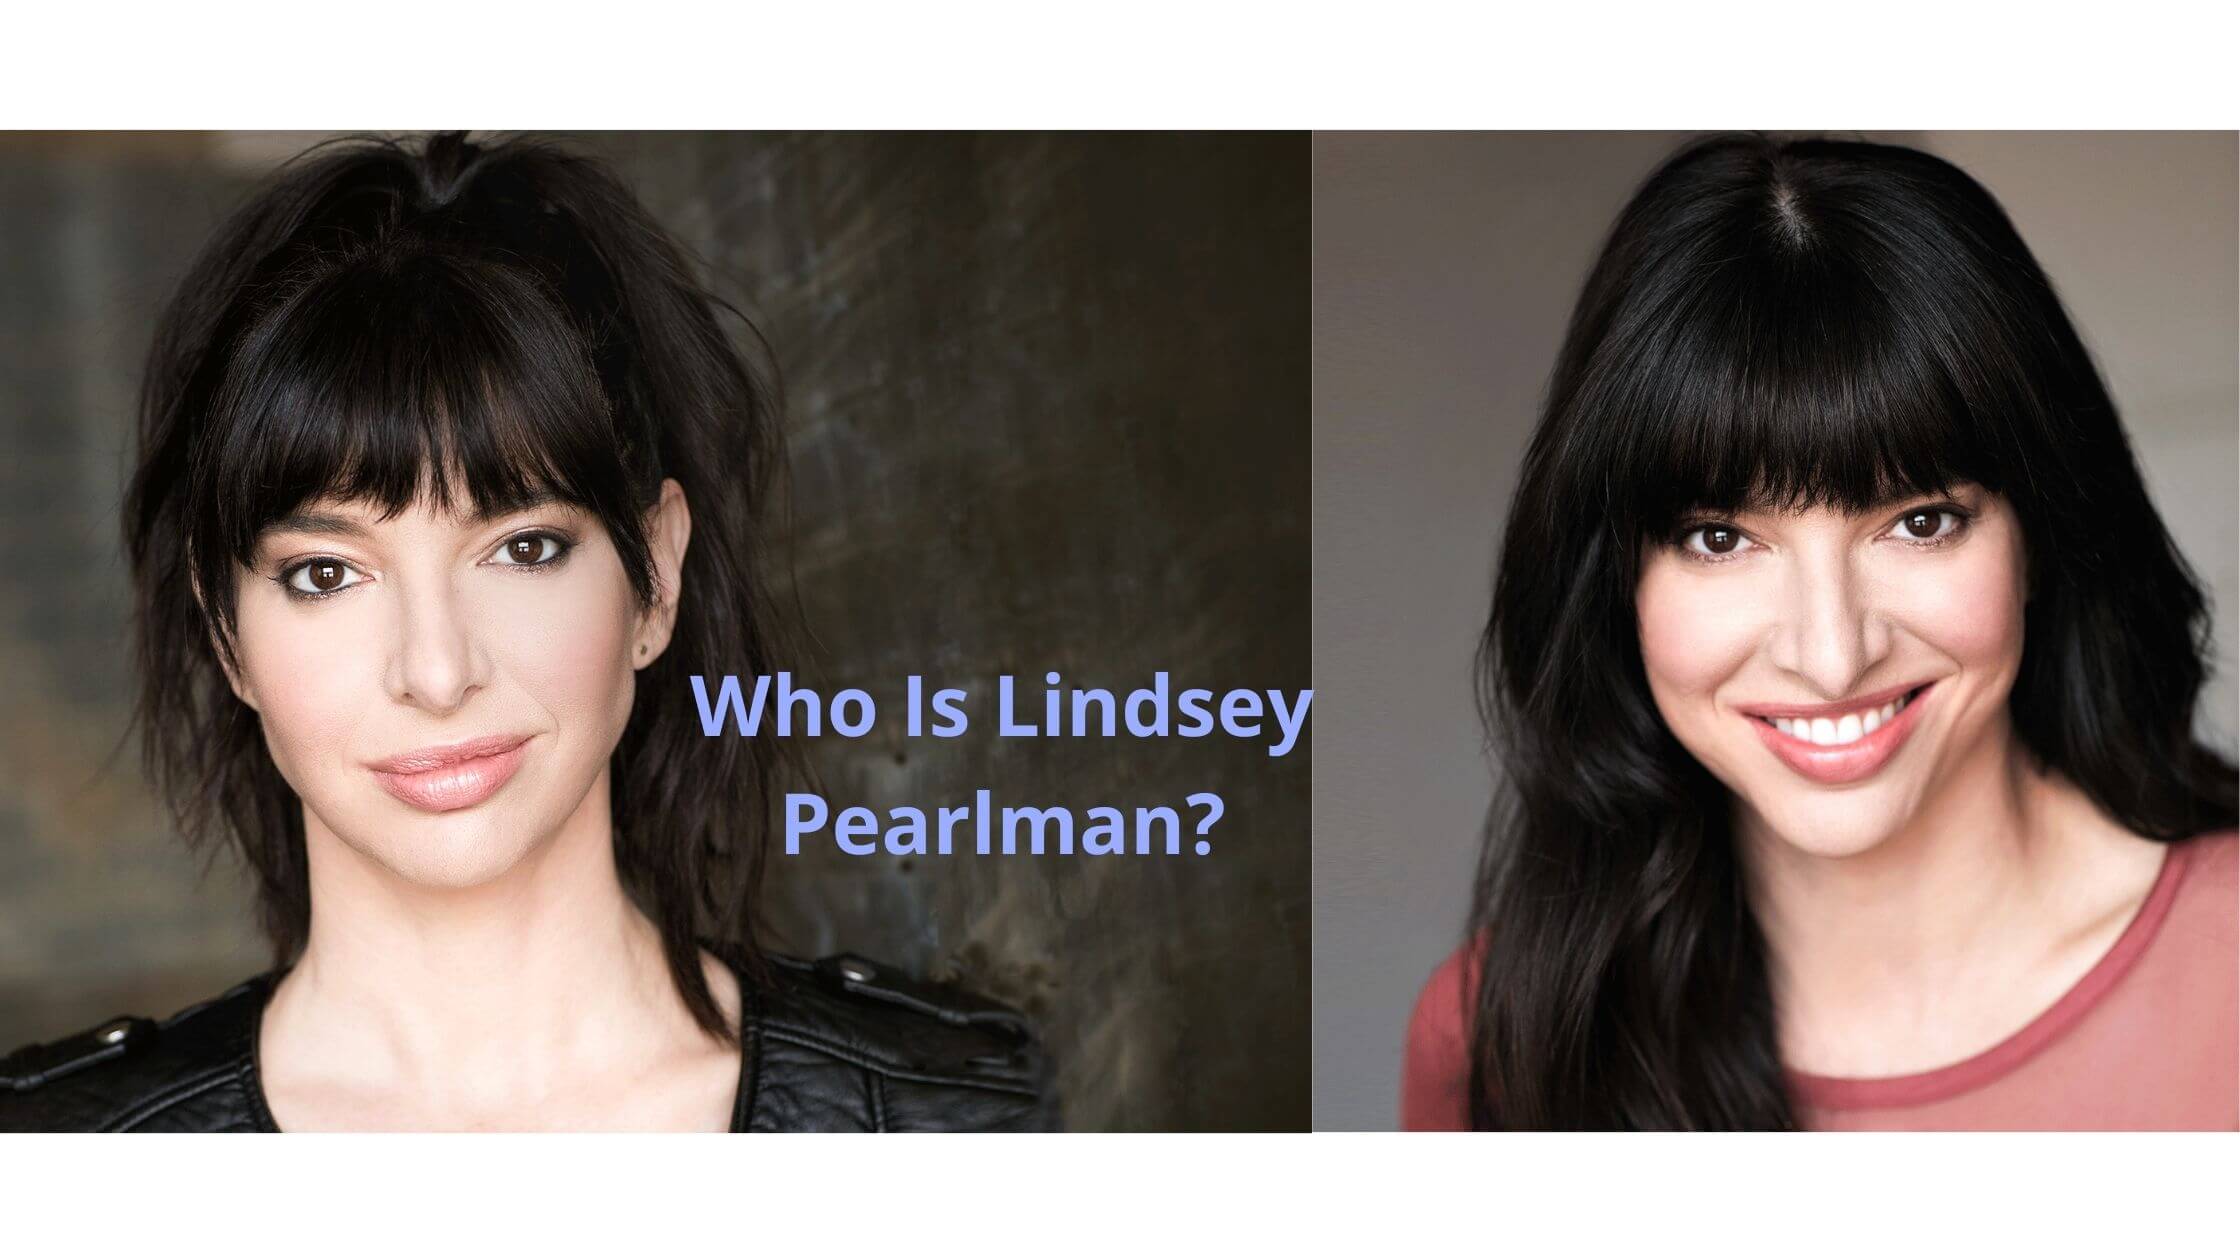 General-Hospital-And-American-Housewife-Fame-Lindsey-Pearlman-Found-Dead-After-Going-Missing-For-Days-In-Los-Angeles